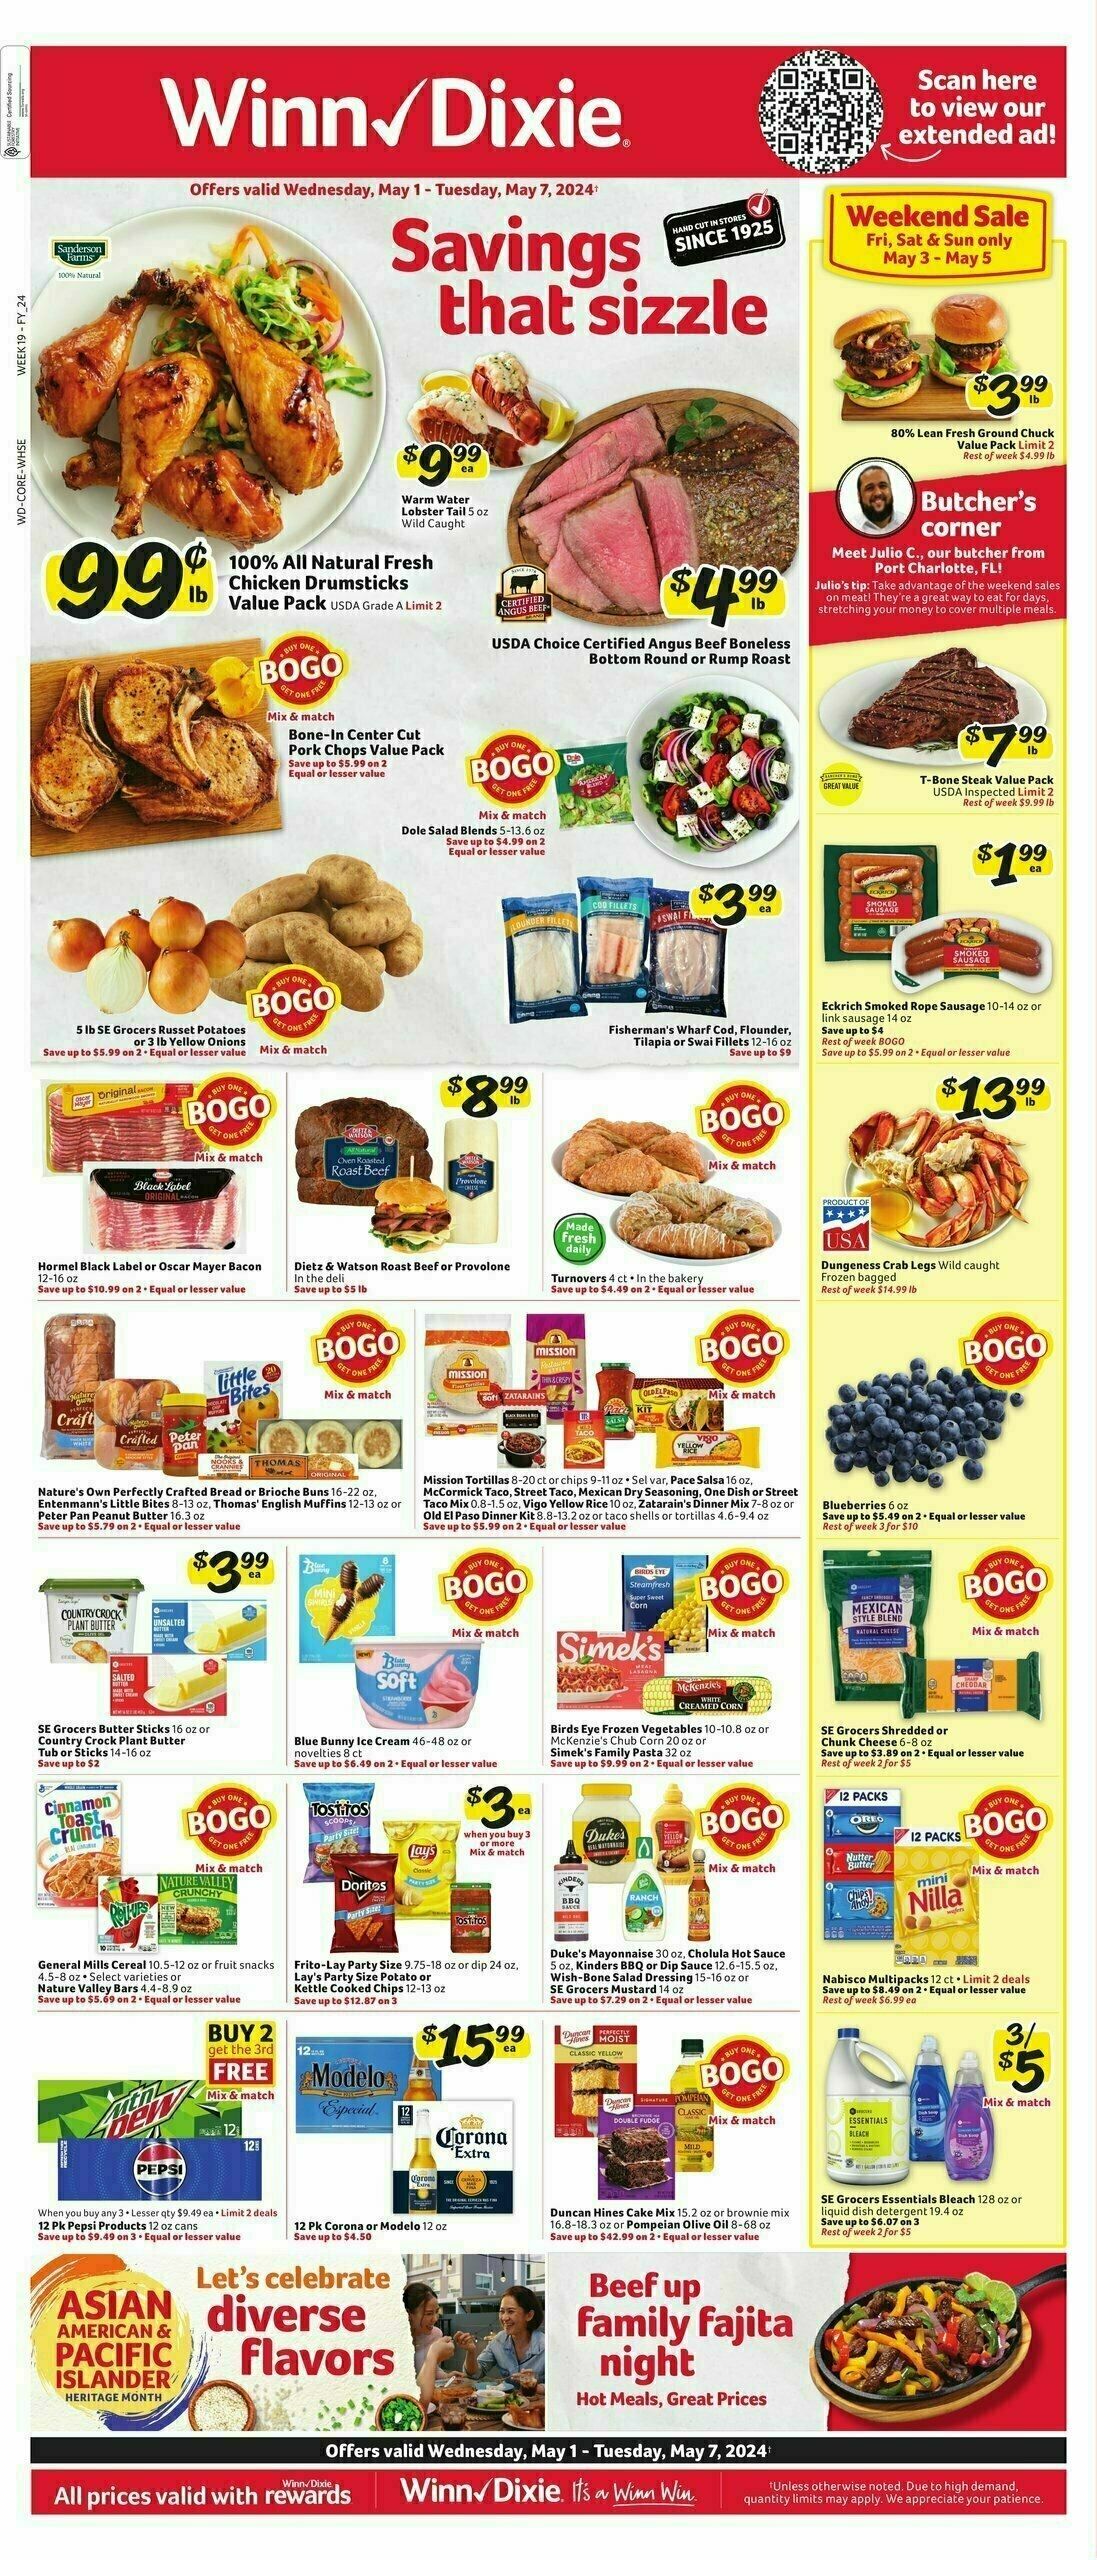 Winn-Dixie Weekly Ad from May 1